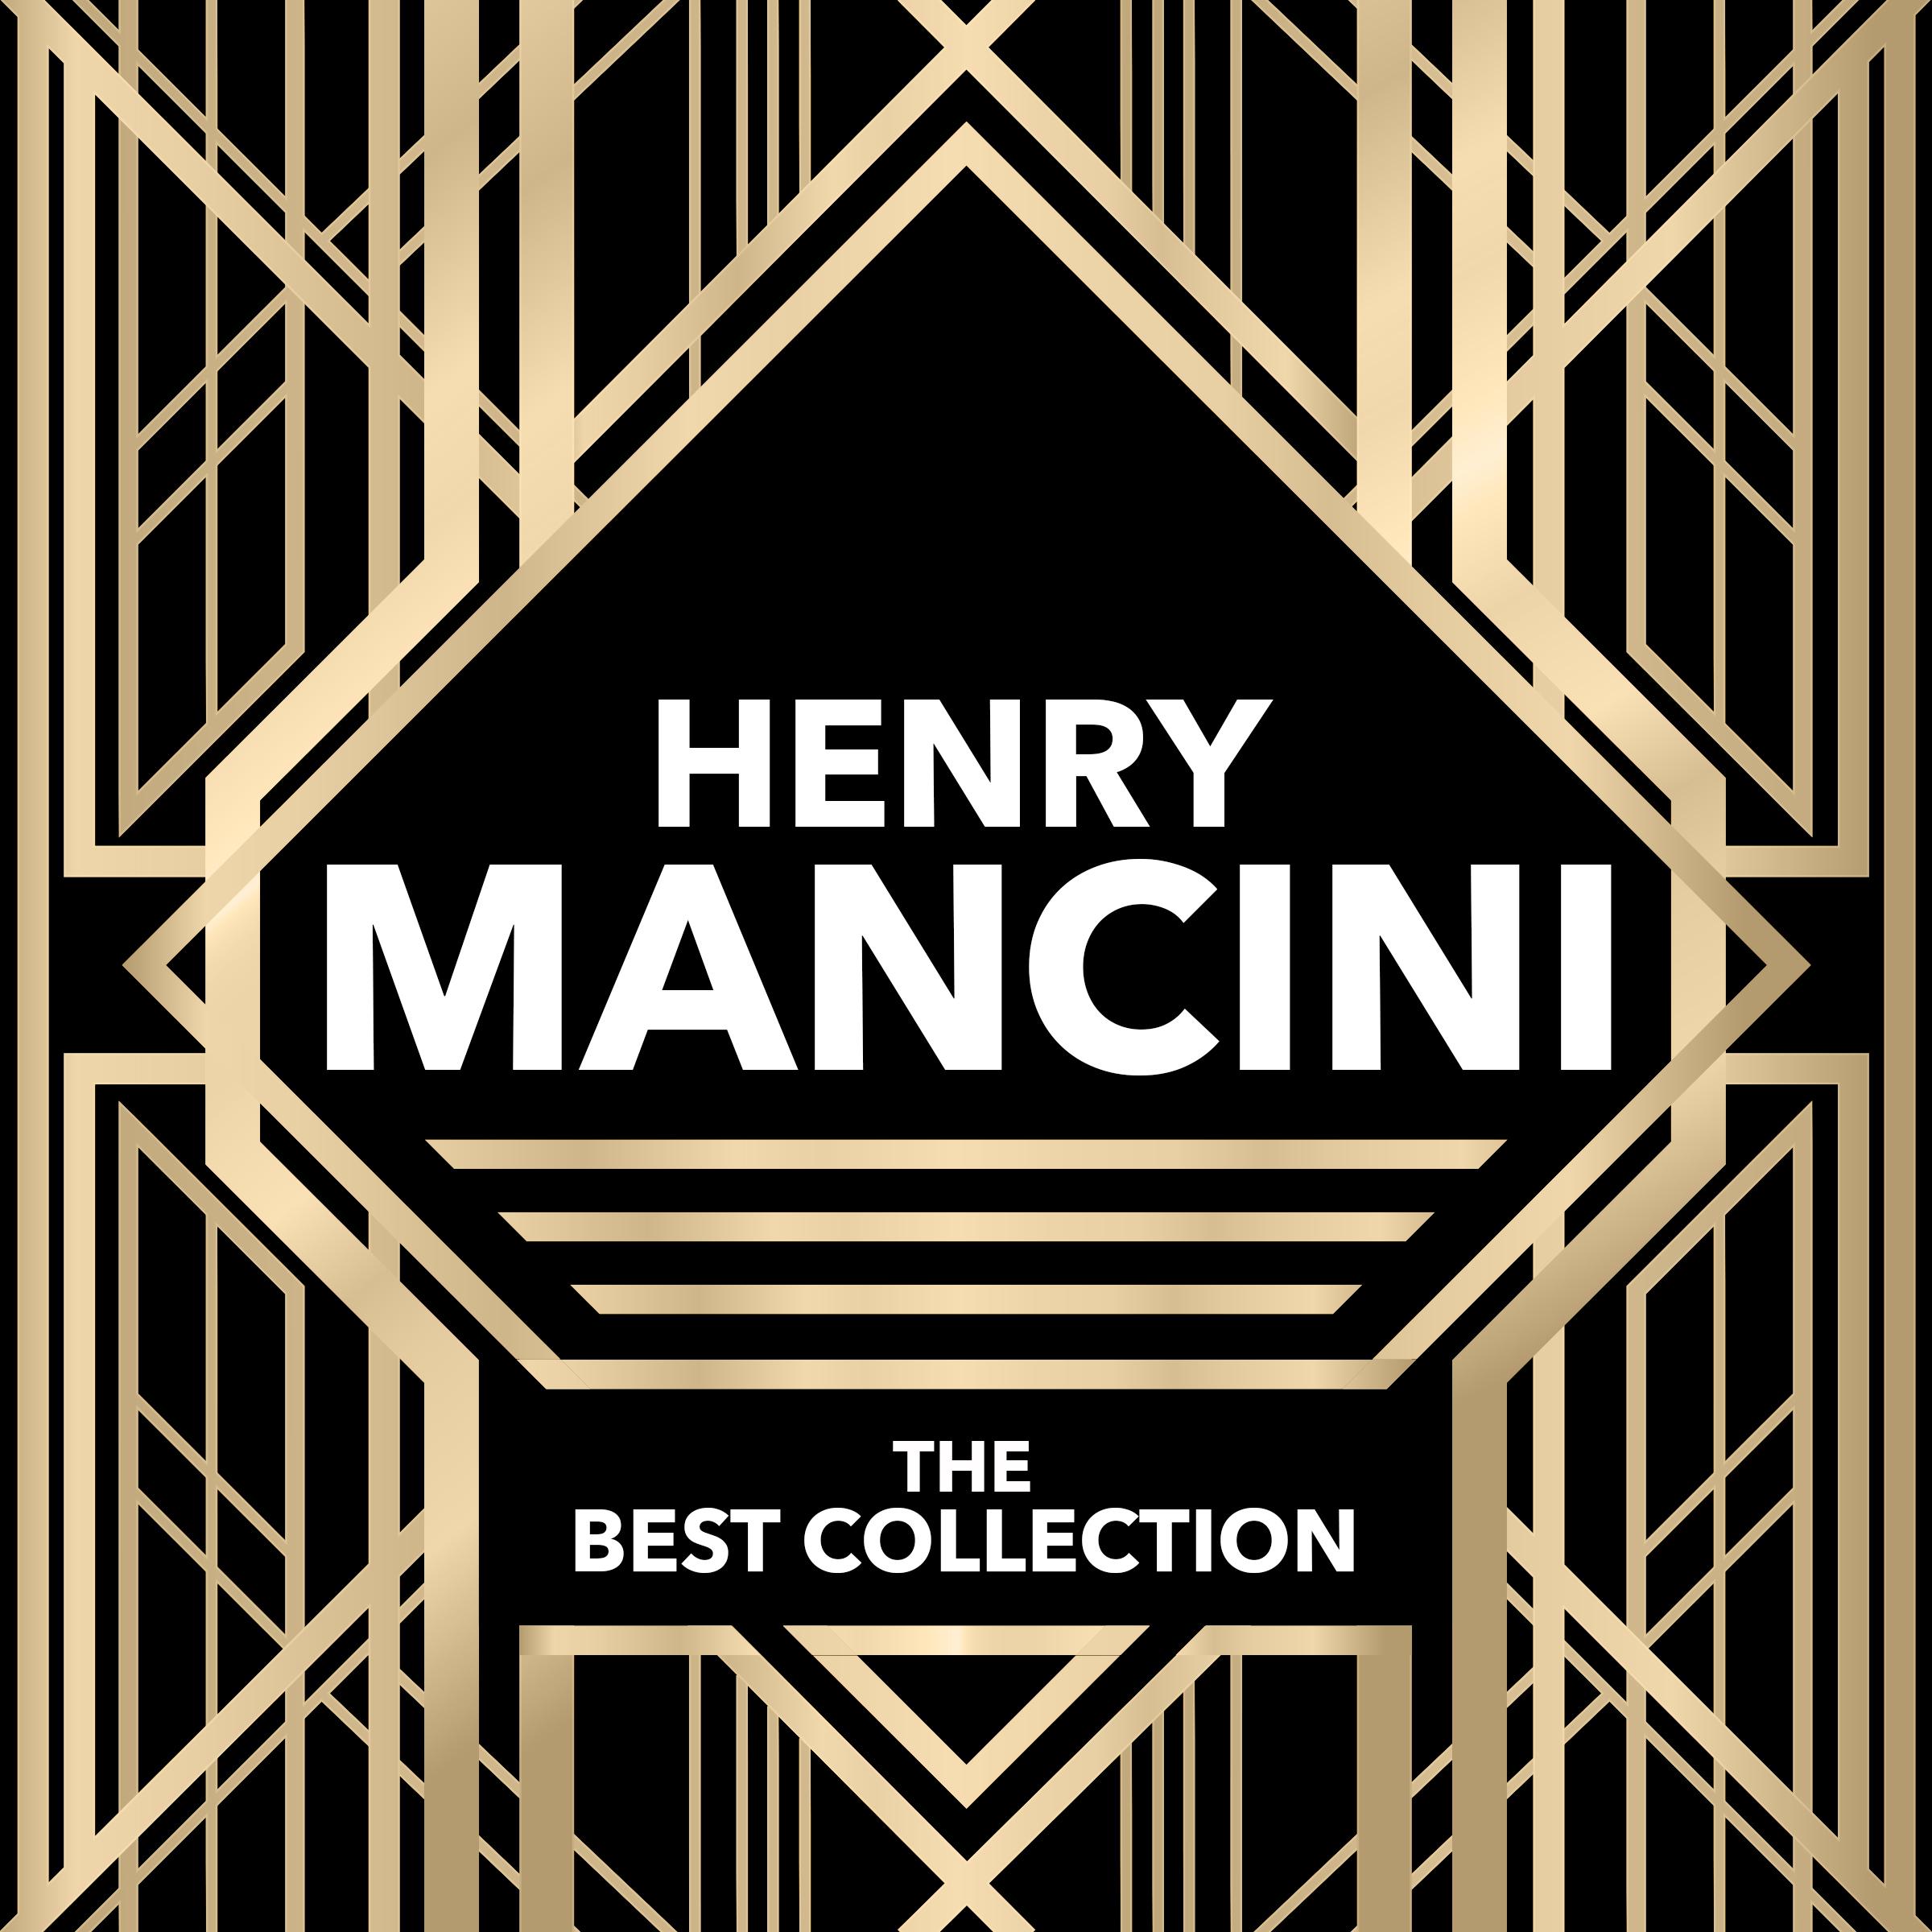 Henry Mancini - The Best Collection